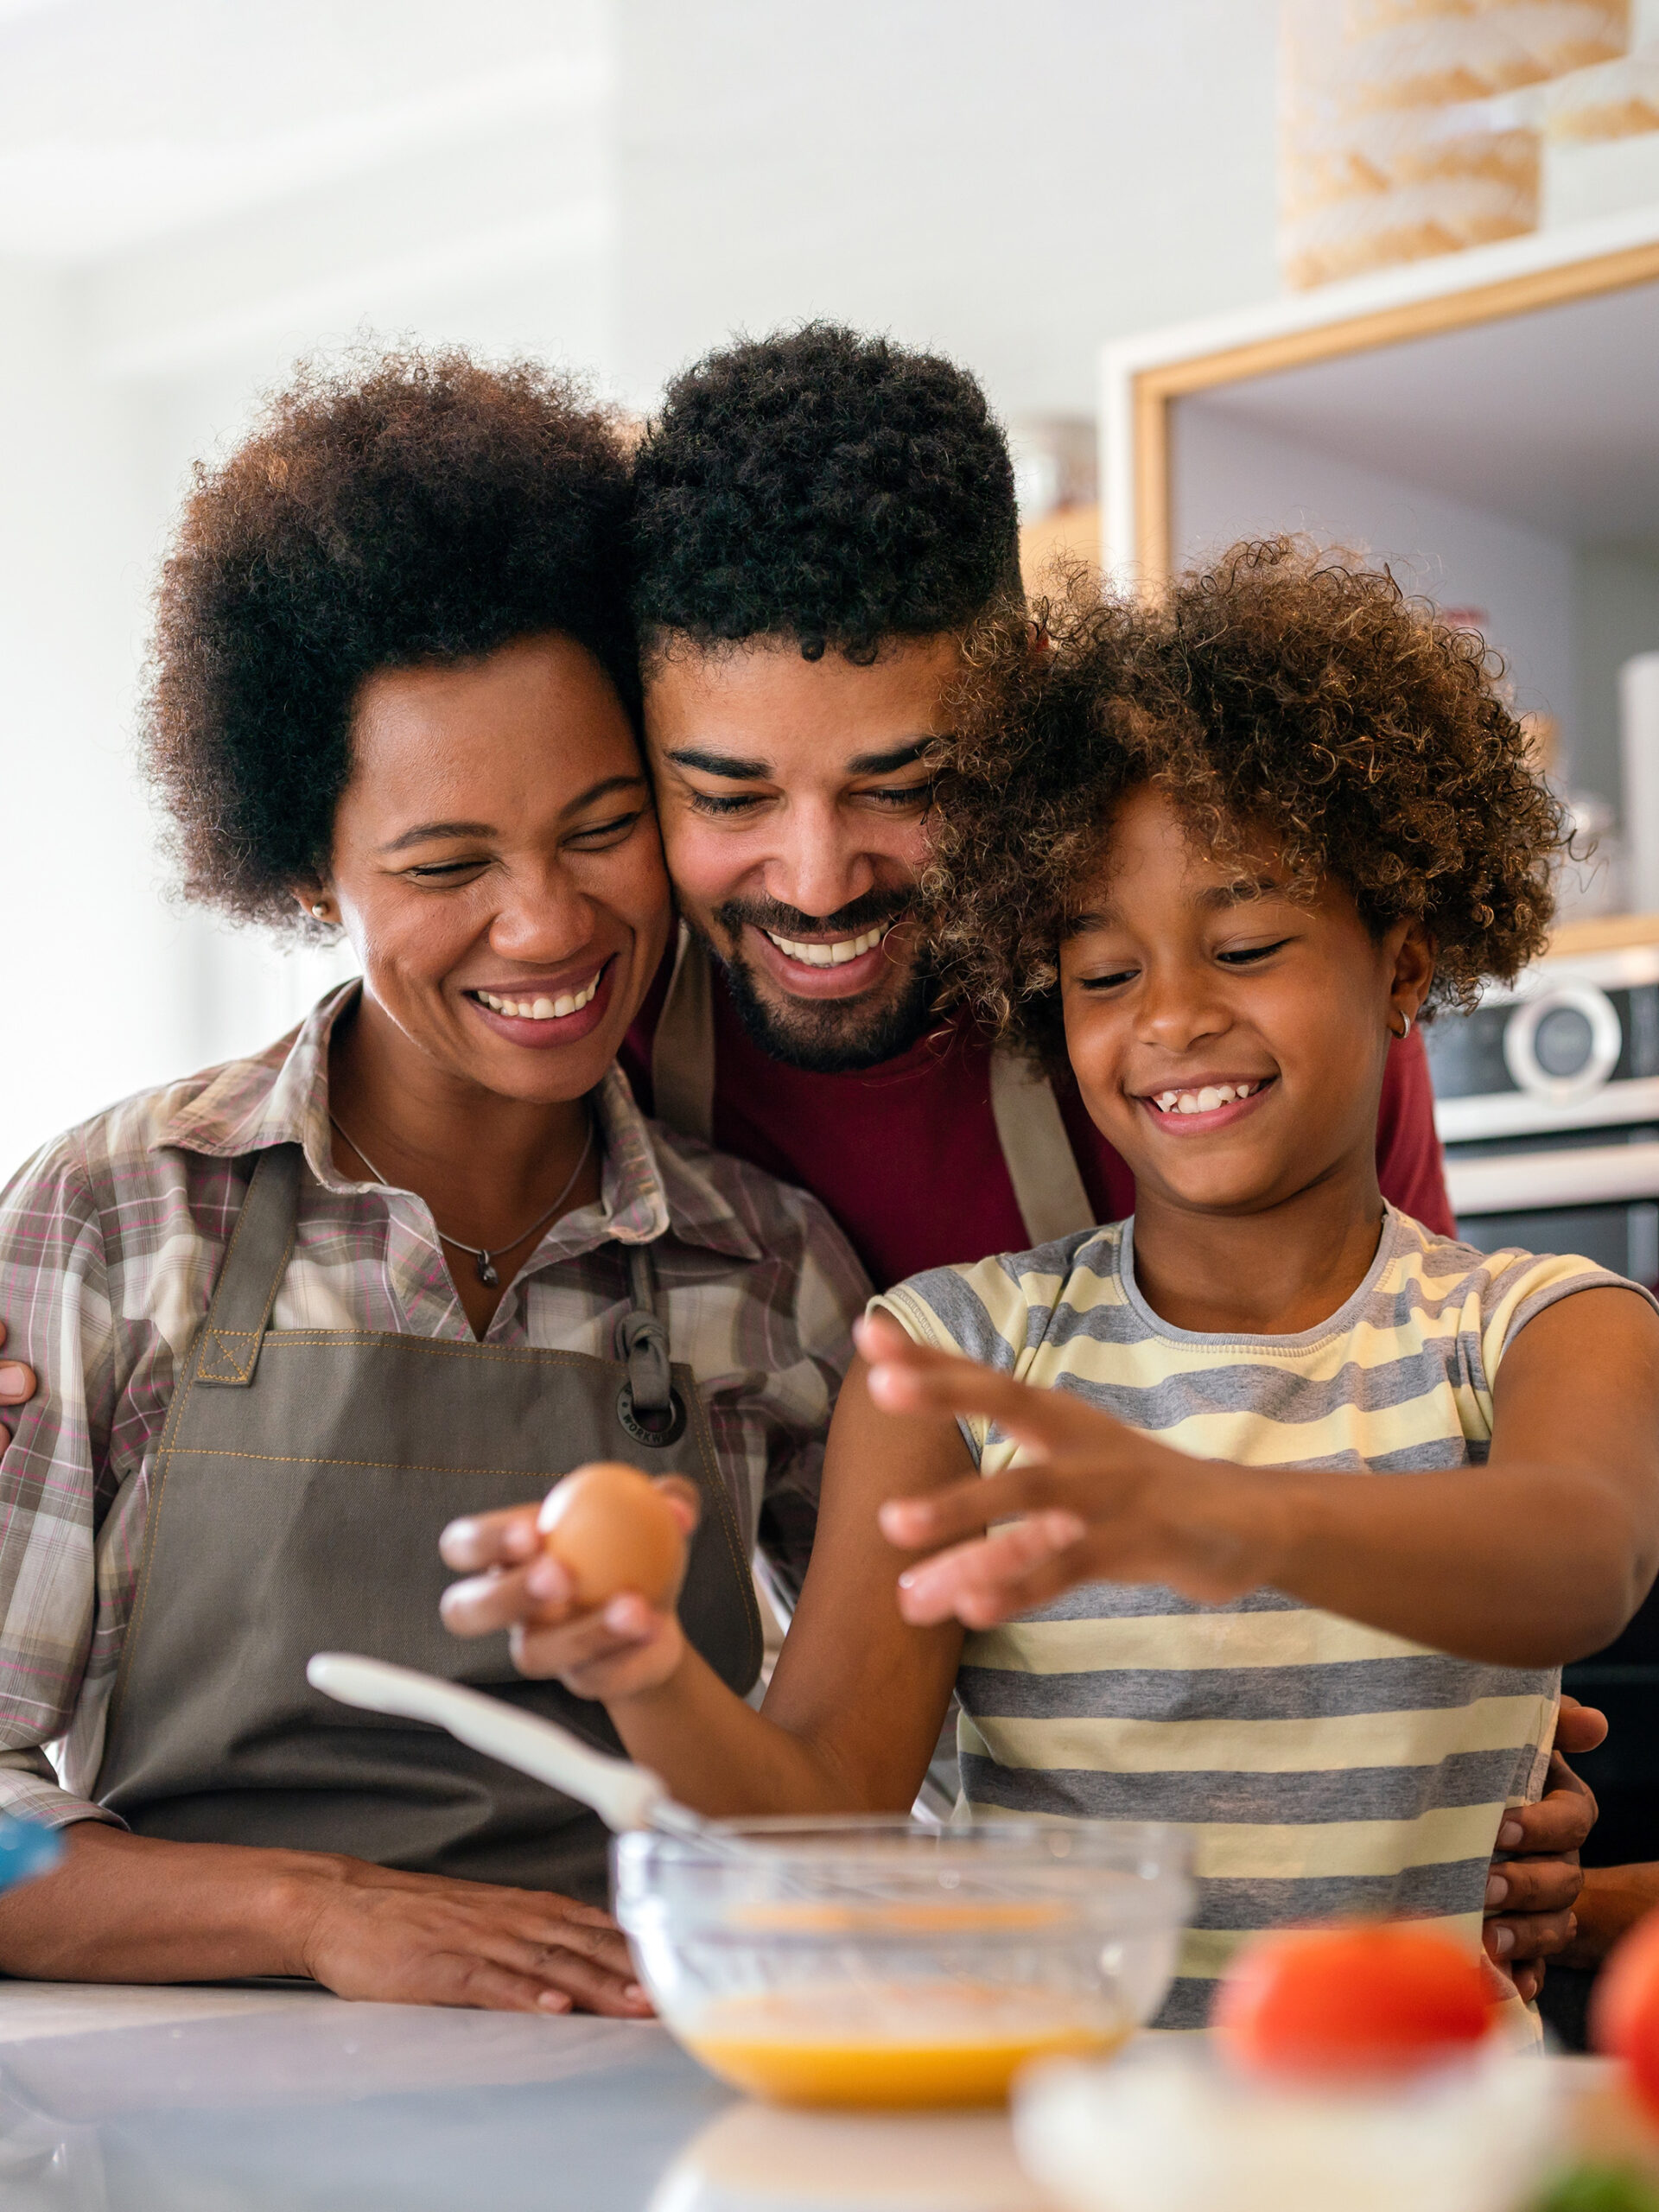 Family cooks together in kitchen - how to get your family involved in healthy cooking